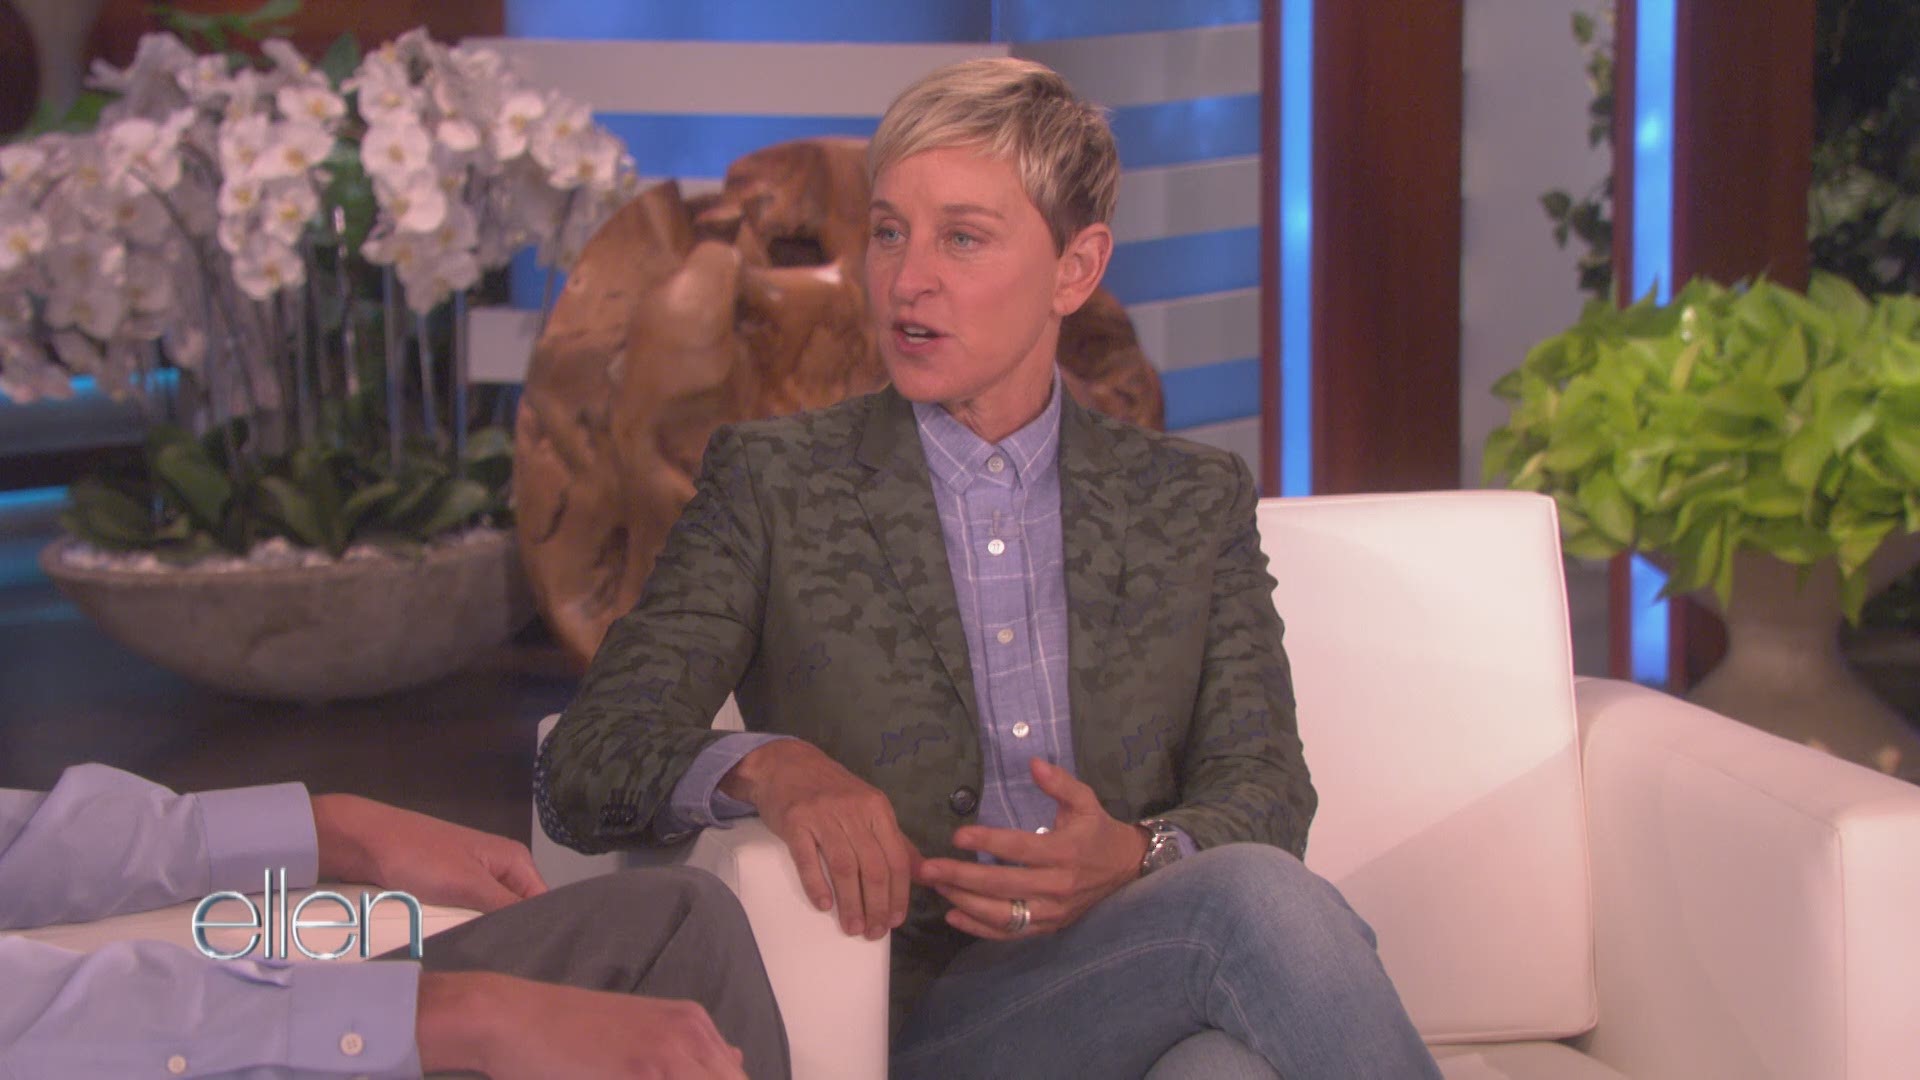 Seth Owen found him self sleeping on his friends' couches and at risk of losing his university scholarship after his family found out about his sexuality. Now, he's sharing his story of triumph with Ellen DeGeneres.